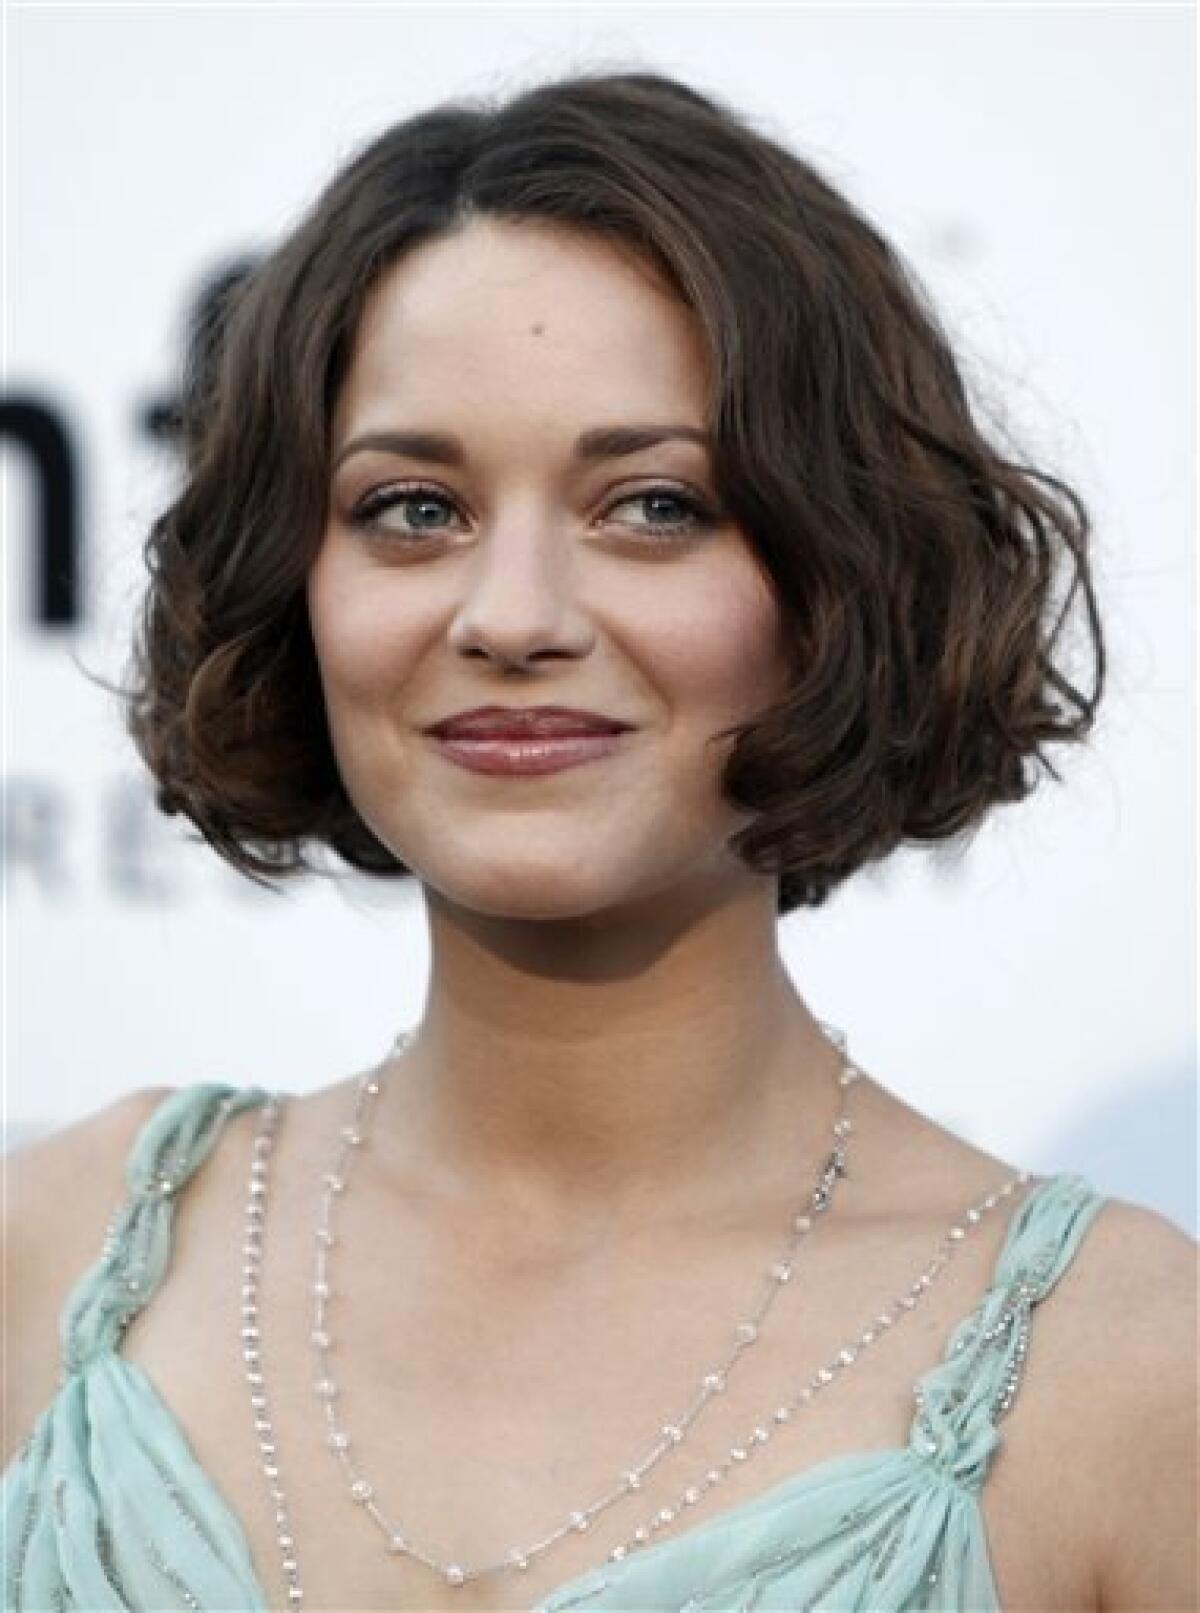 FILE - In this May 21, 2009 file photo, French actress Marion Cotillard arrives for the amfAR Cinema Against AIDS benefit at the Hotel du Cap-Eden-Roc, during the 62nd Cannes International film festival, in Antibes, southern France. (AP Photo/Matt Sayles, file)